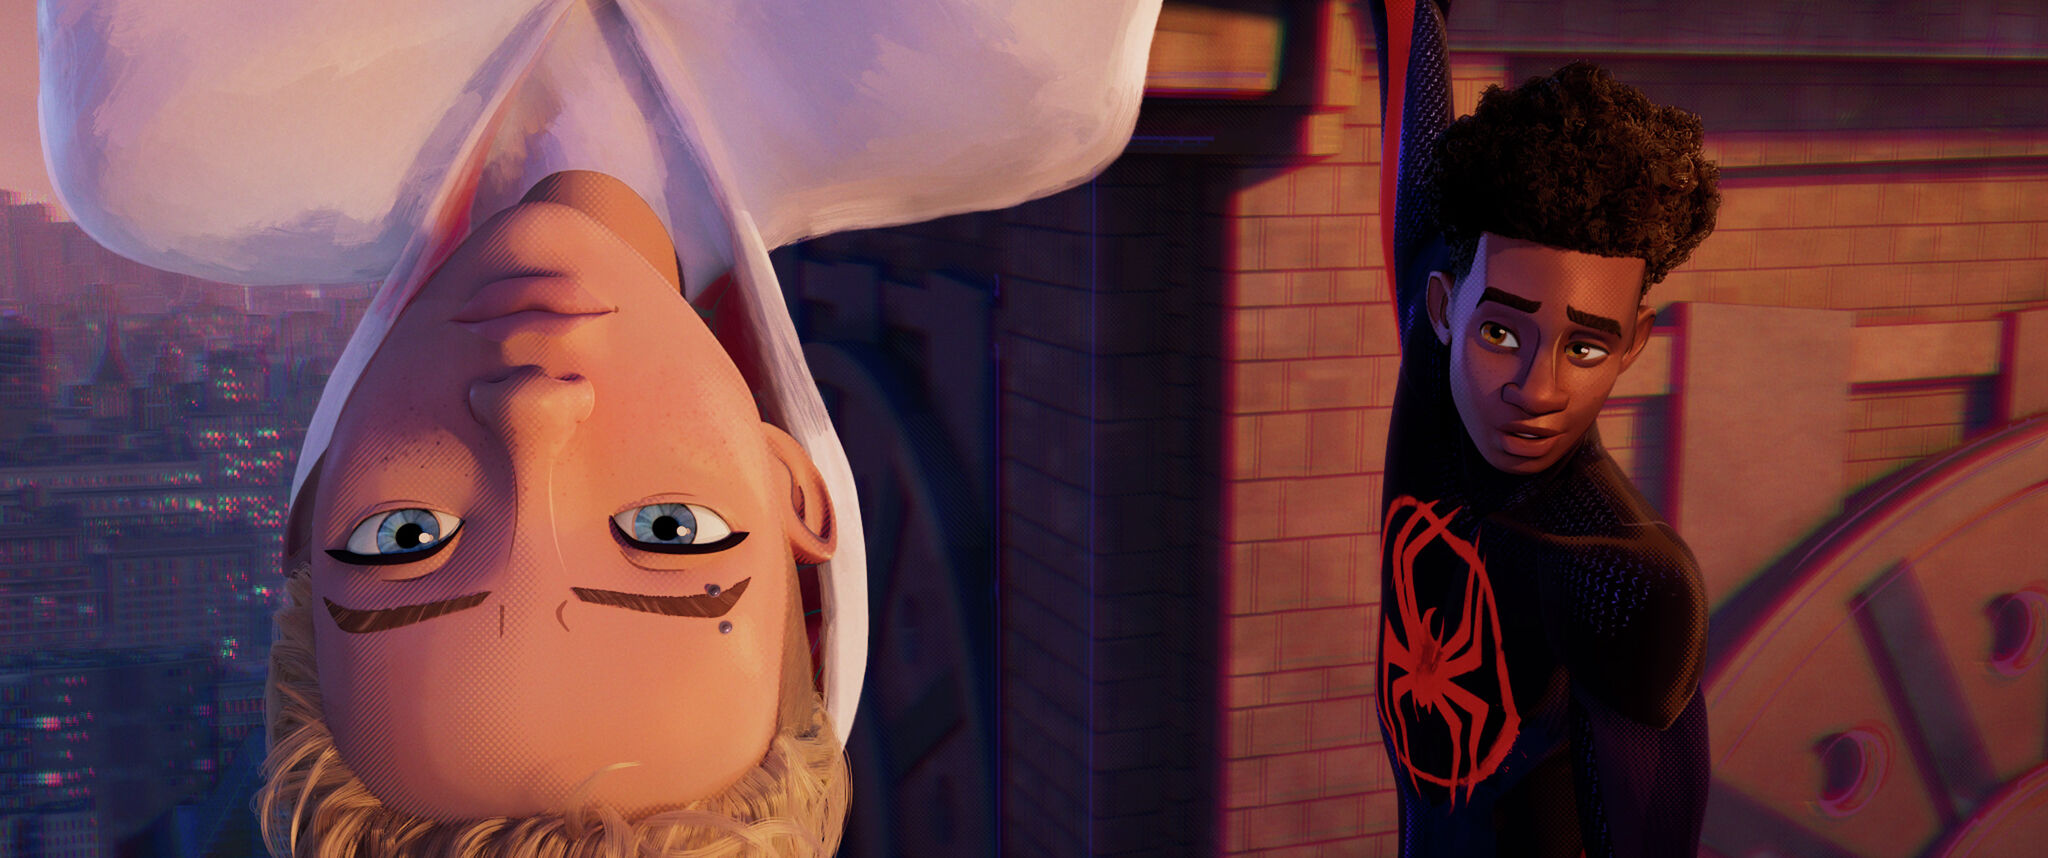 Spider-Man: Across the Spider-Verse review round-up: Critics weigh in -  GoldDerby